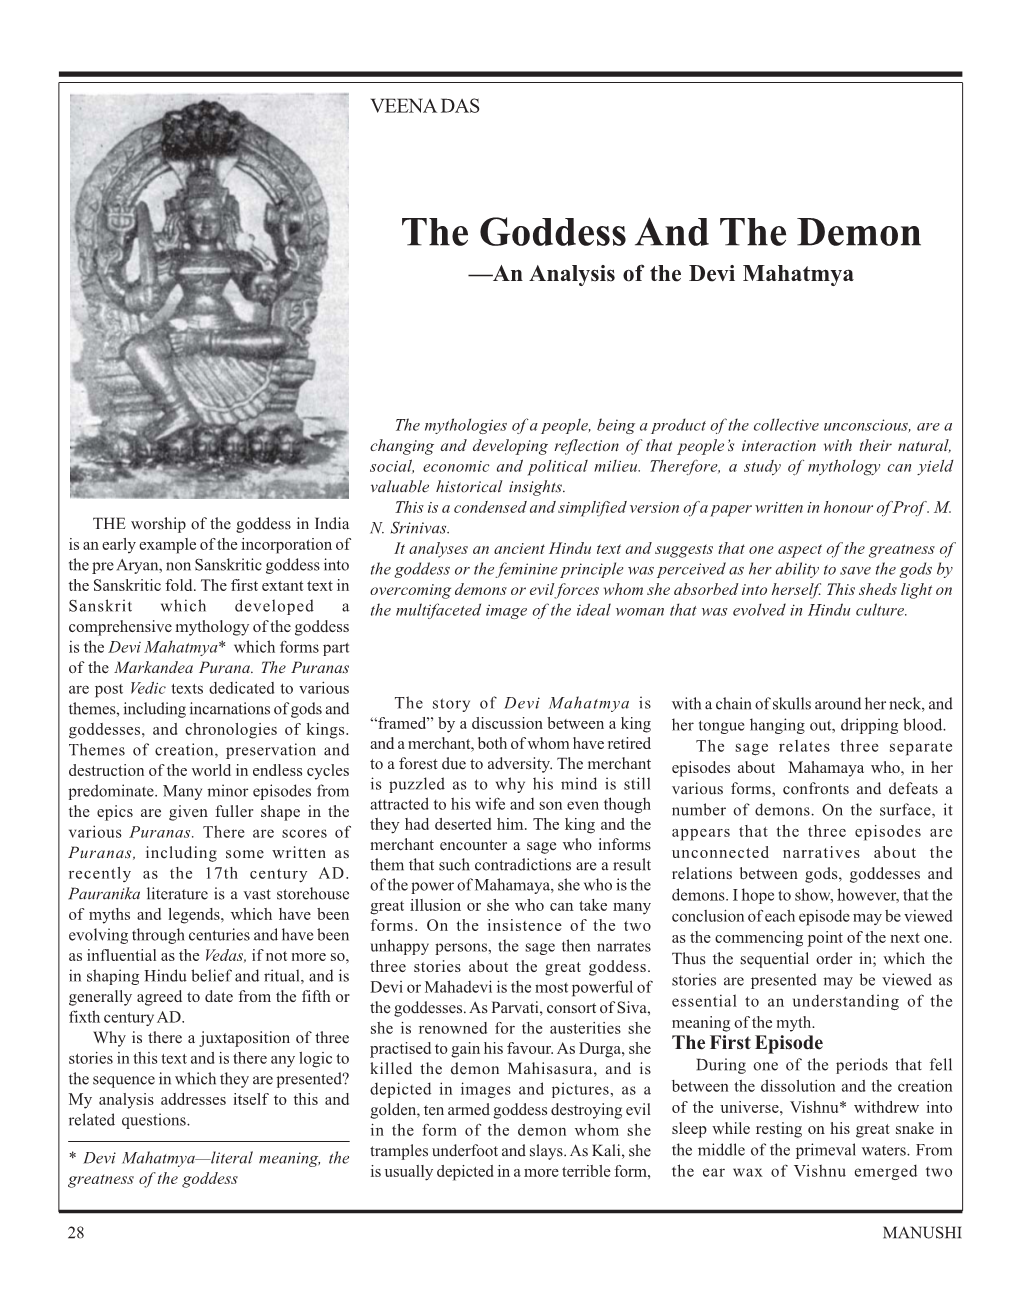 The Goddess and the Demon : Analysis of Devi